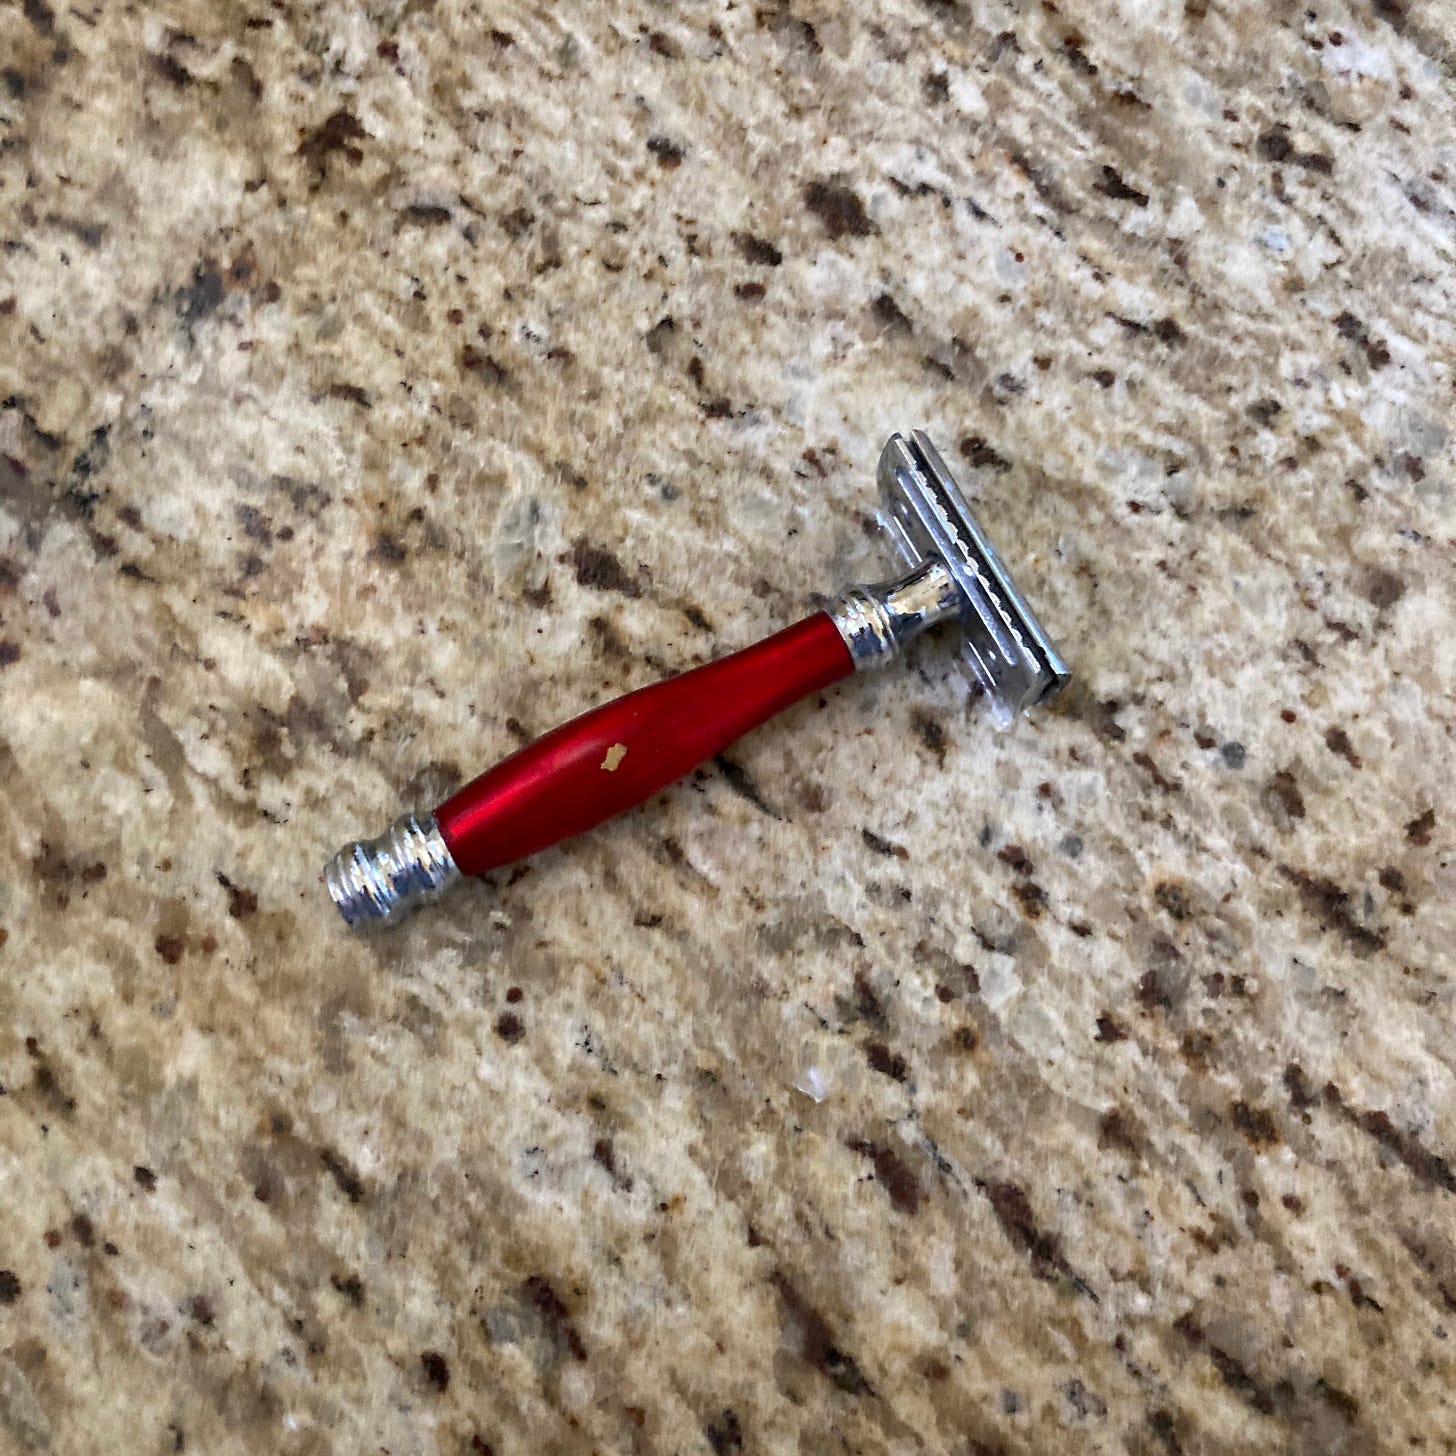 Visual description: A metal safety razor with a silver end, red handle, and silver top rests on a gray and brown granite countertop.